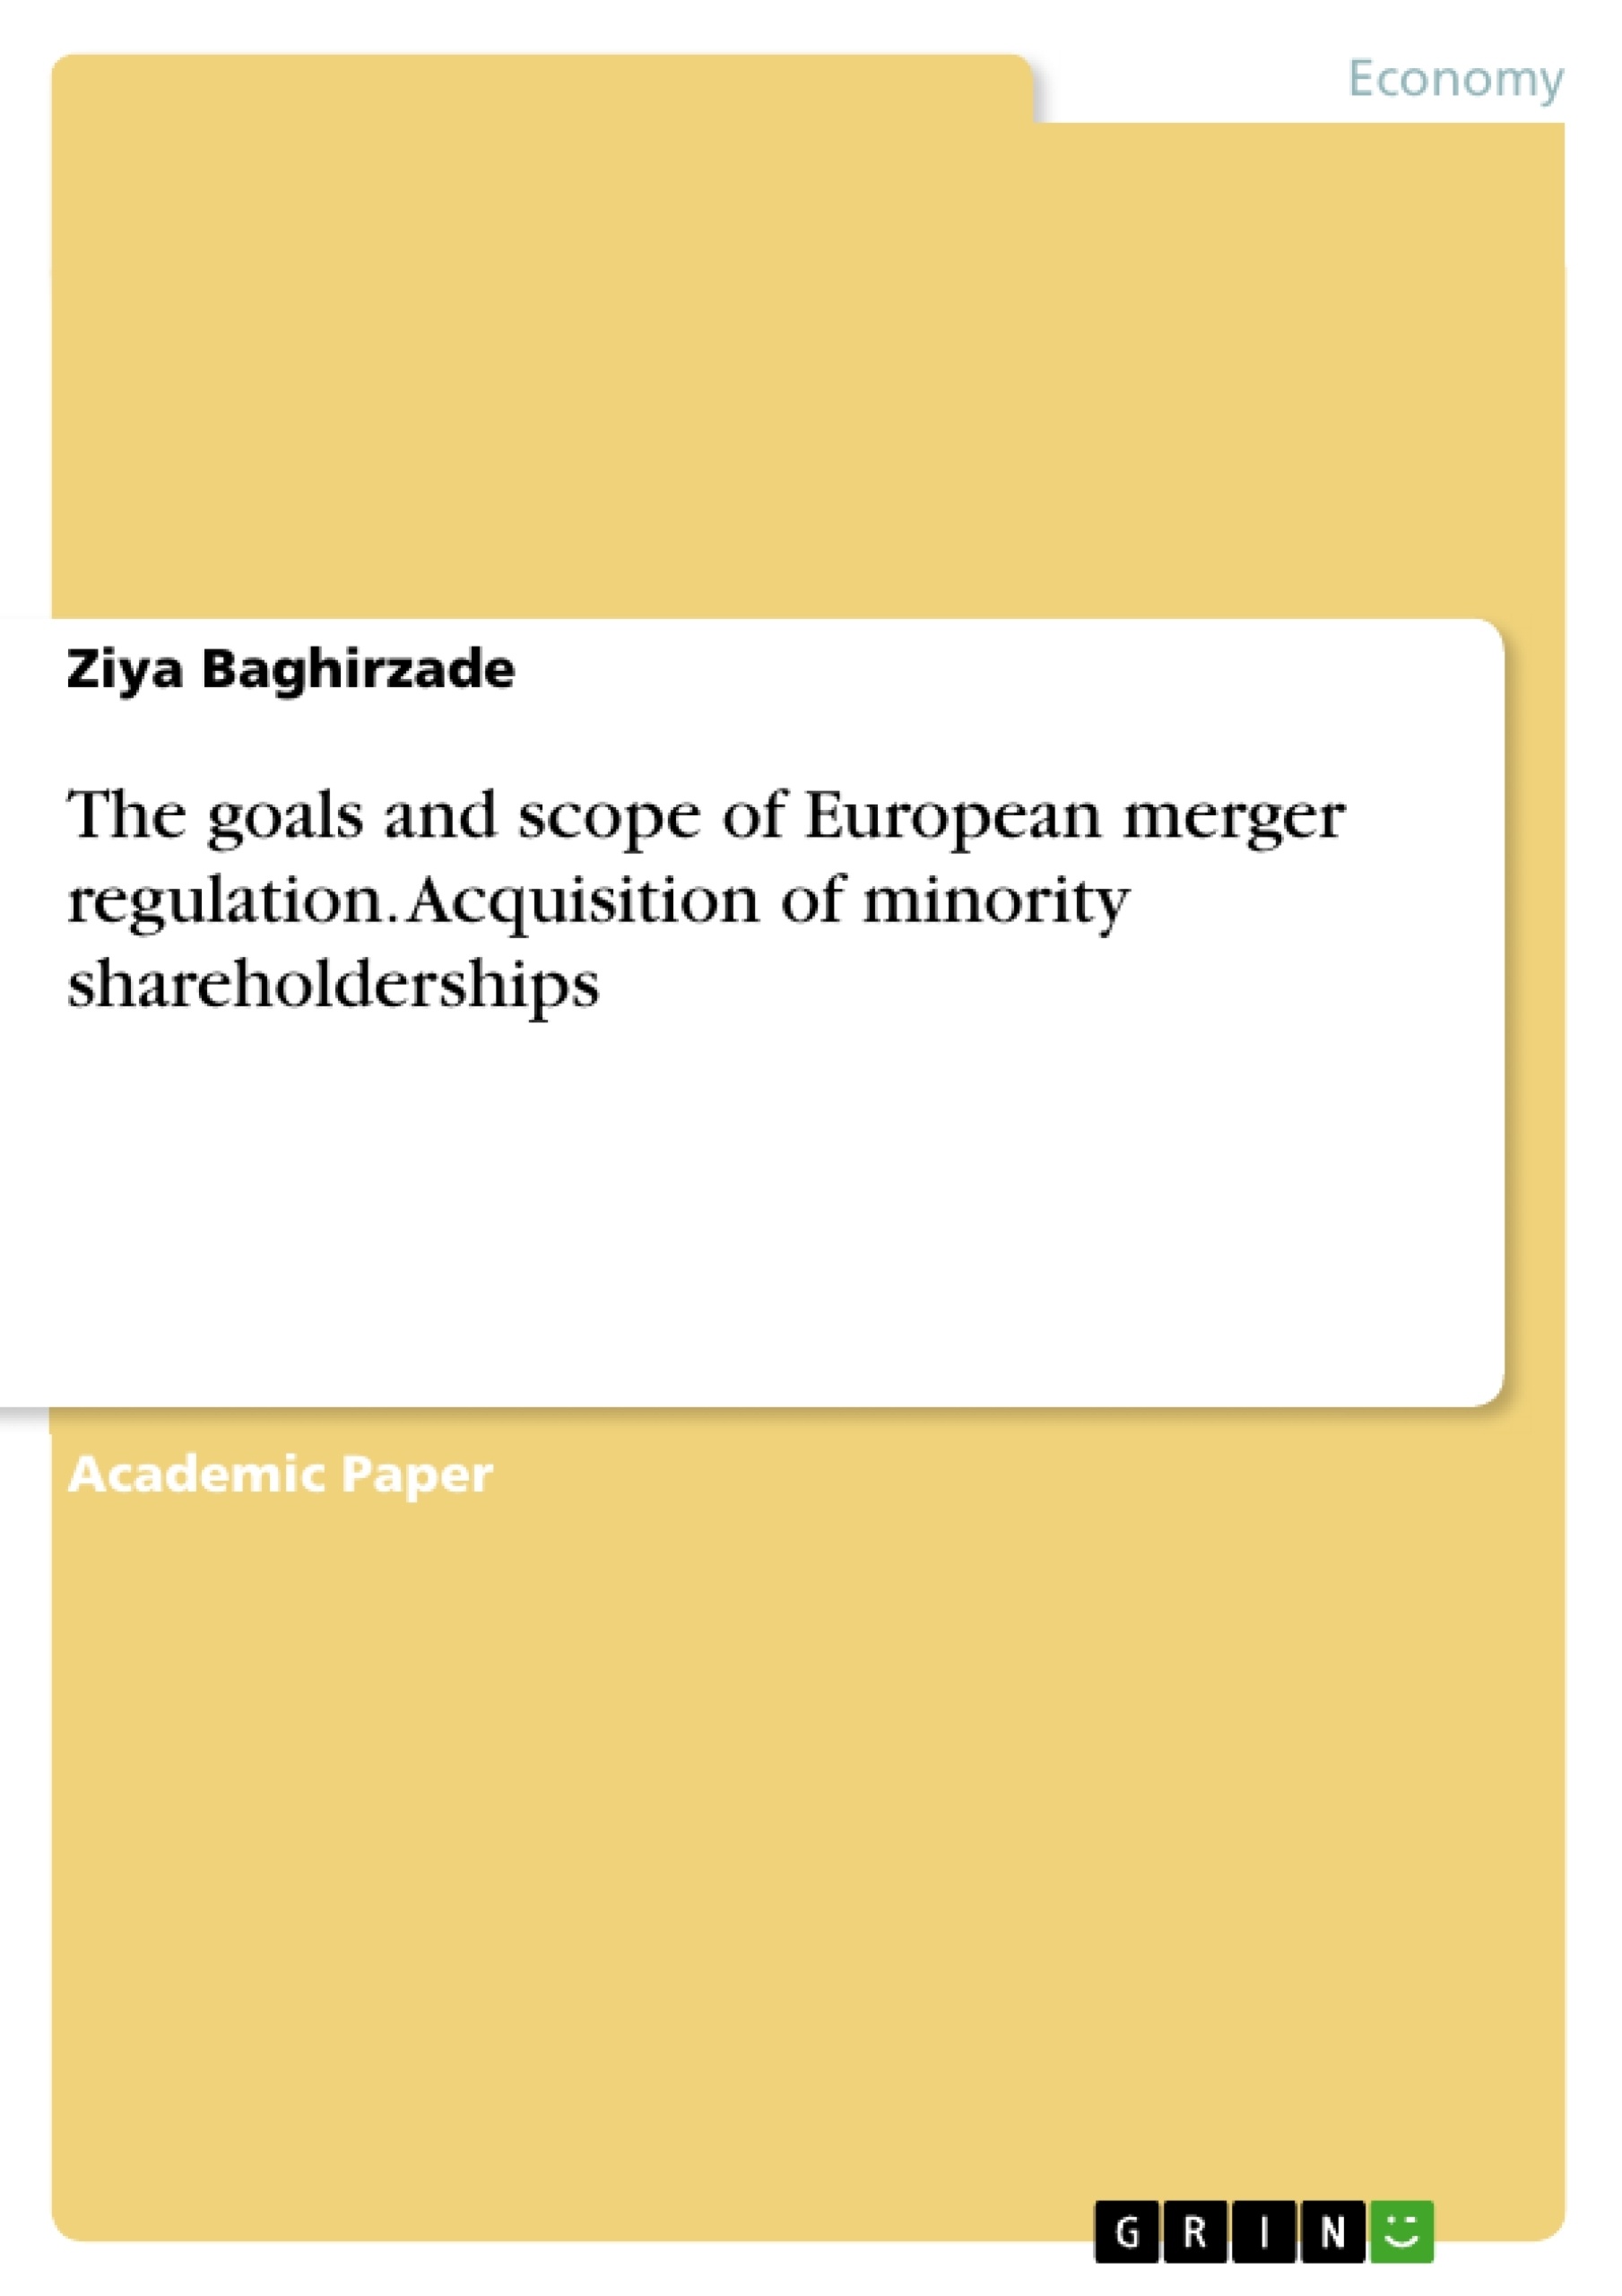 Title: The goals and scope of European merger regulation. Acquisition of minority shareholderships